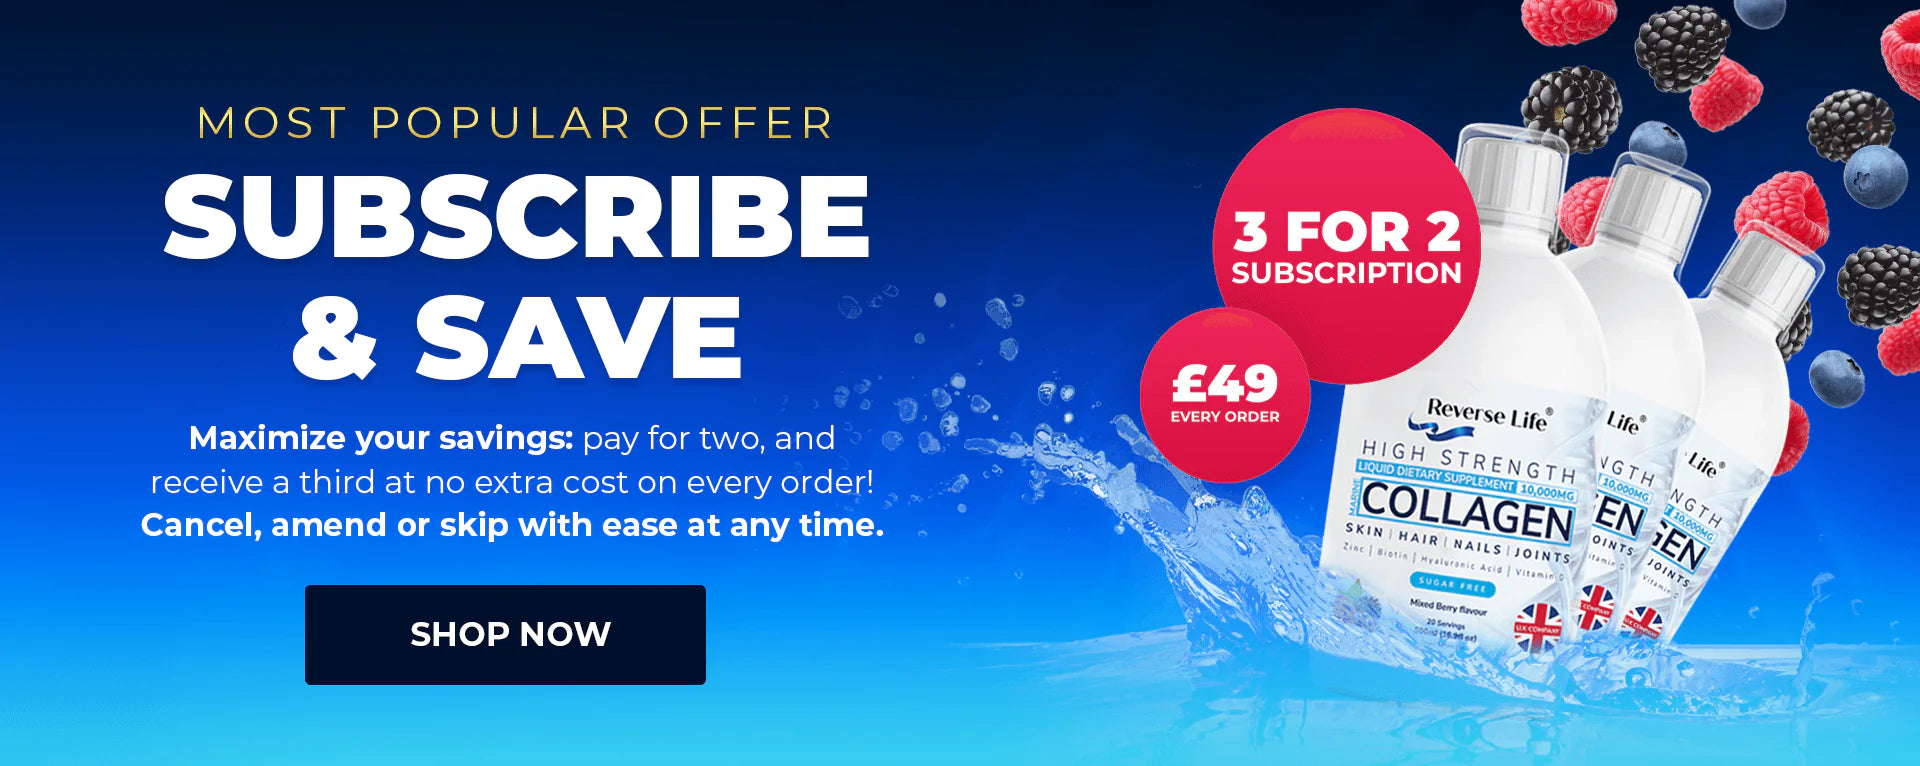 Most Popular Offer. Subscribe & Save. Maximise your savings: pay for two and receive a third at no extra cost on every order! Cancel amend or skip with ease at any time.